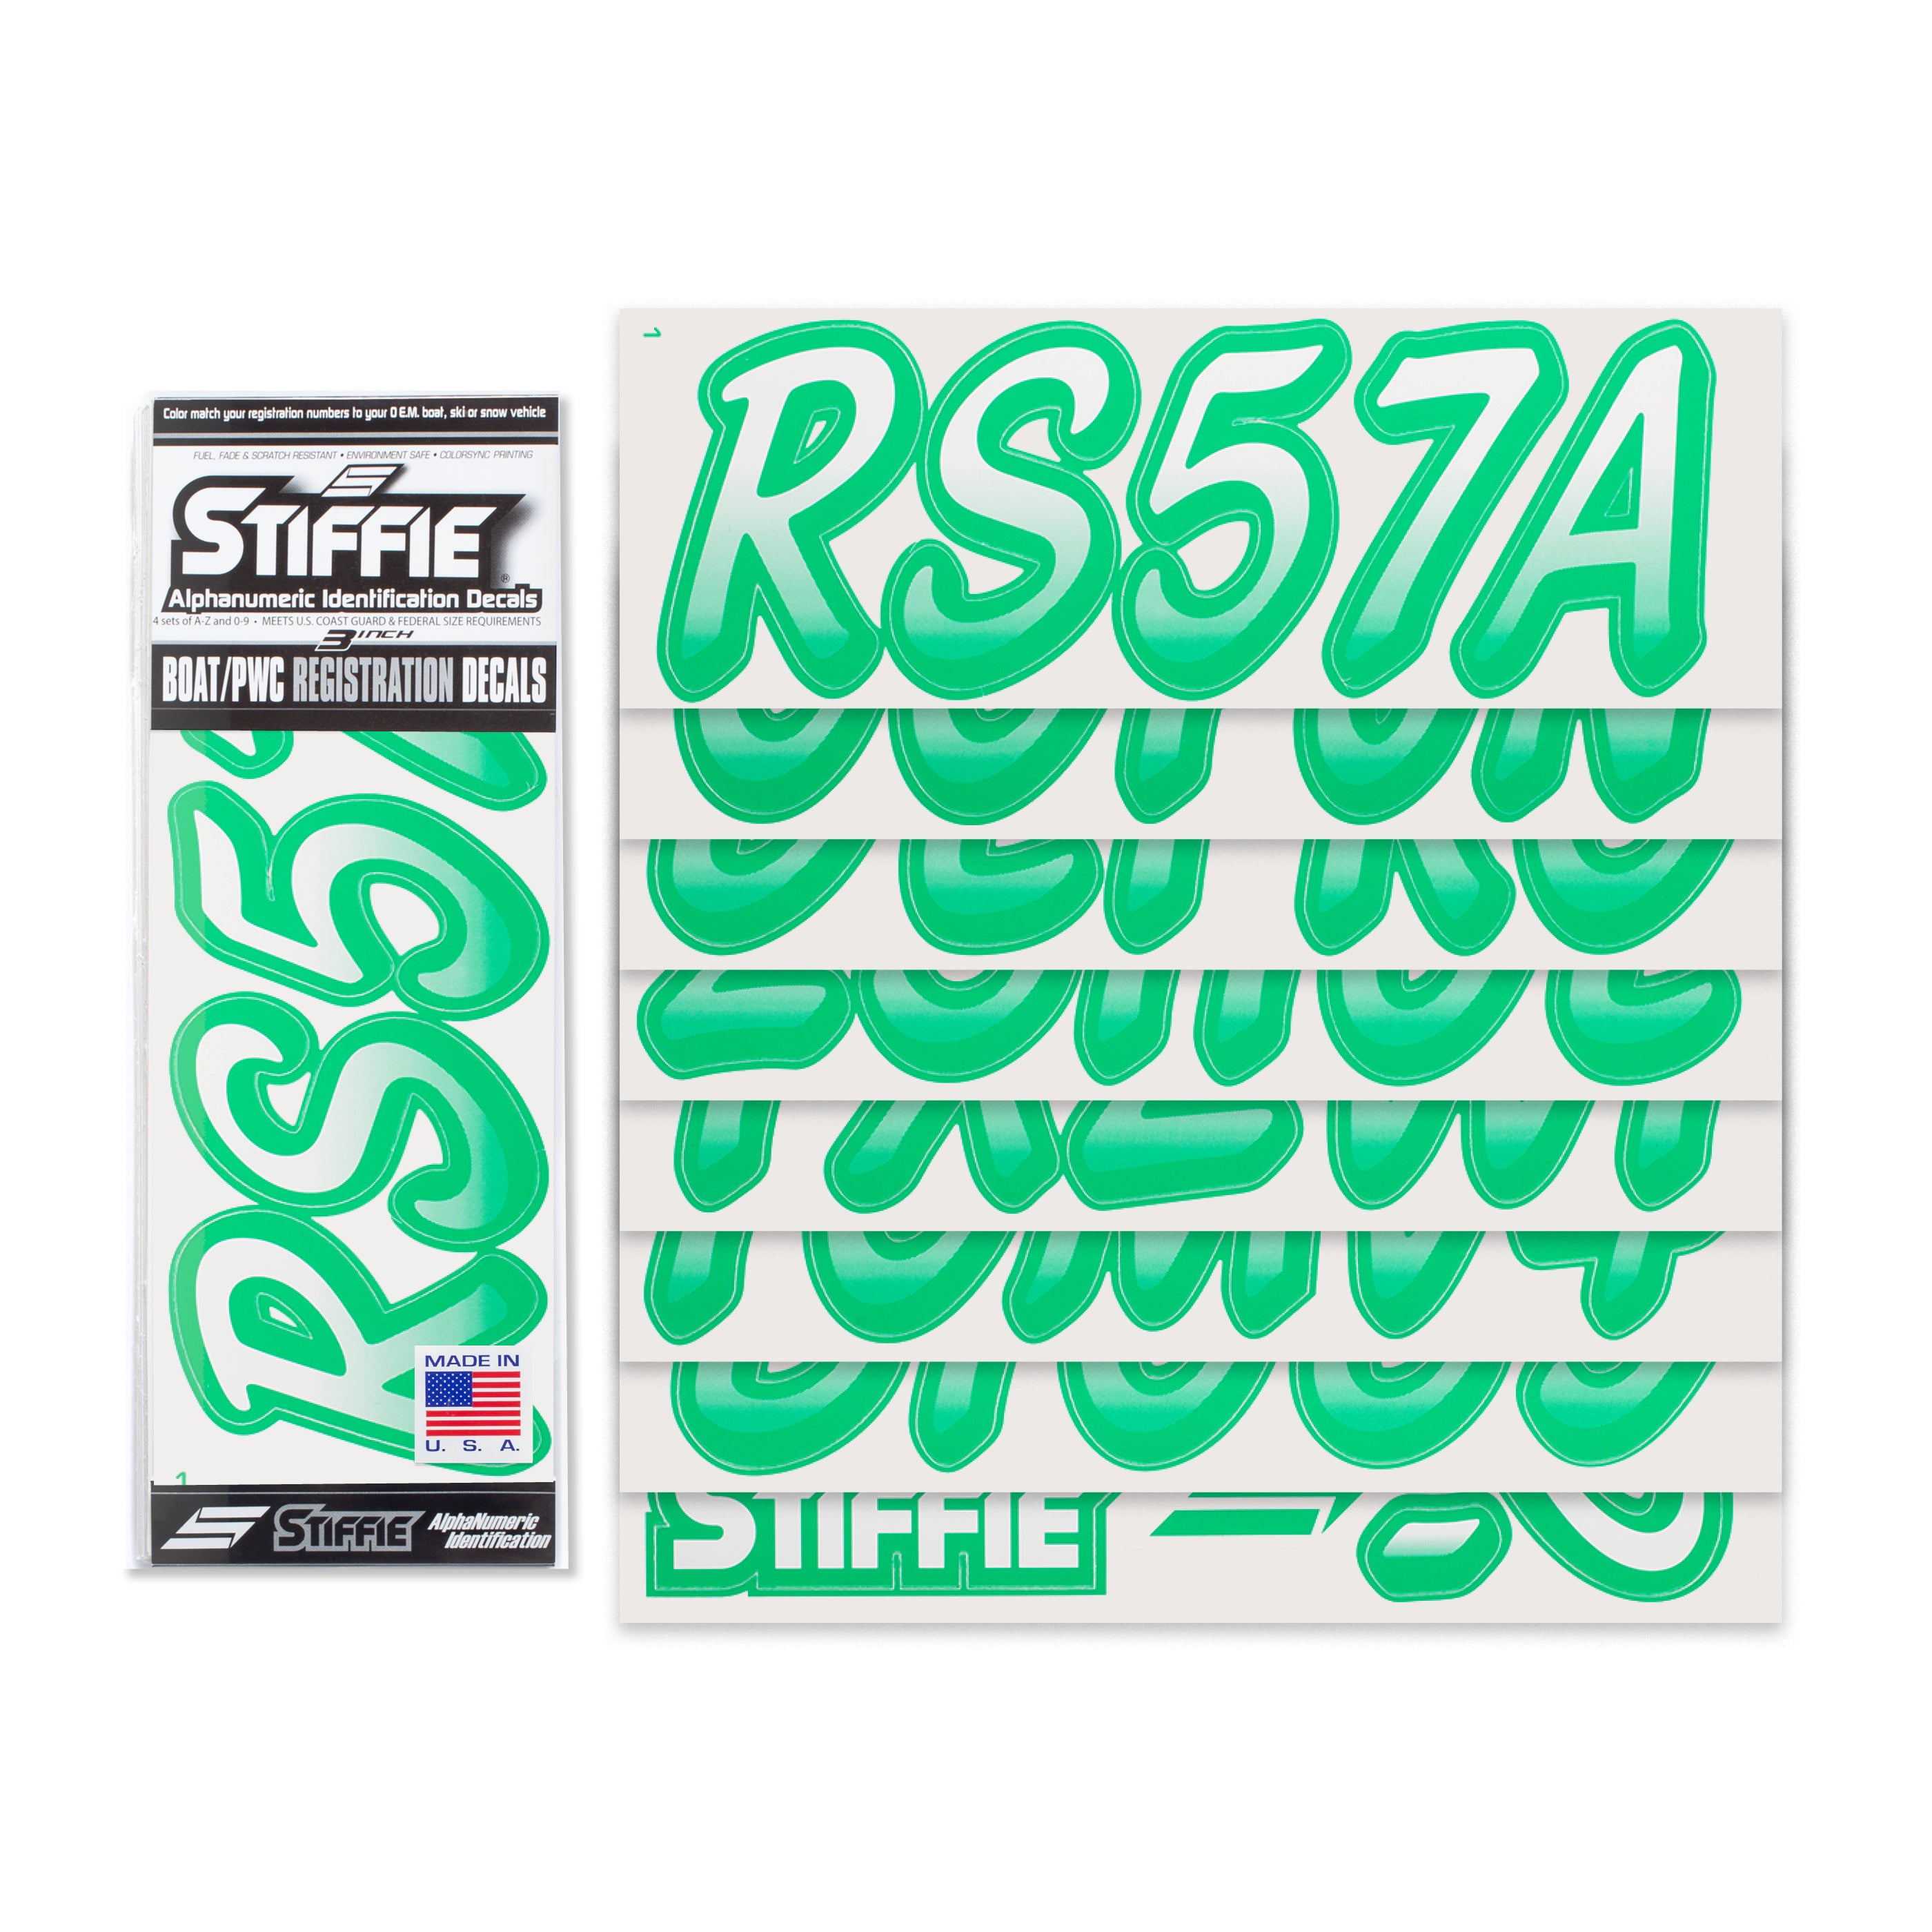 STIFFIE Whipline White/Teal 3" Alpha-Numeric Registration Identification Numbers Stickers Decals for Boats & Personal Watercraft